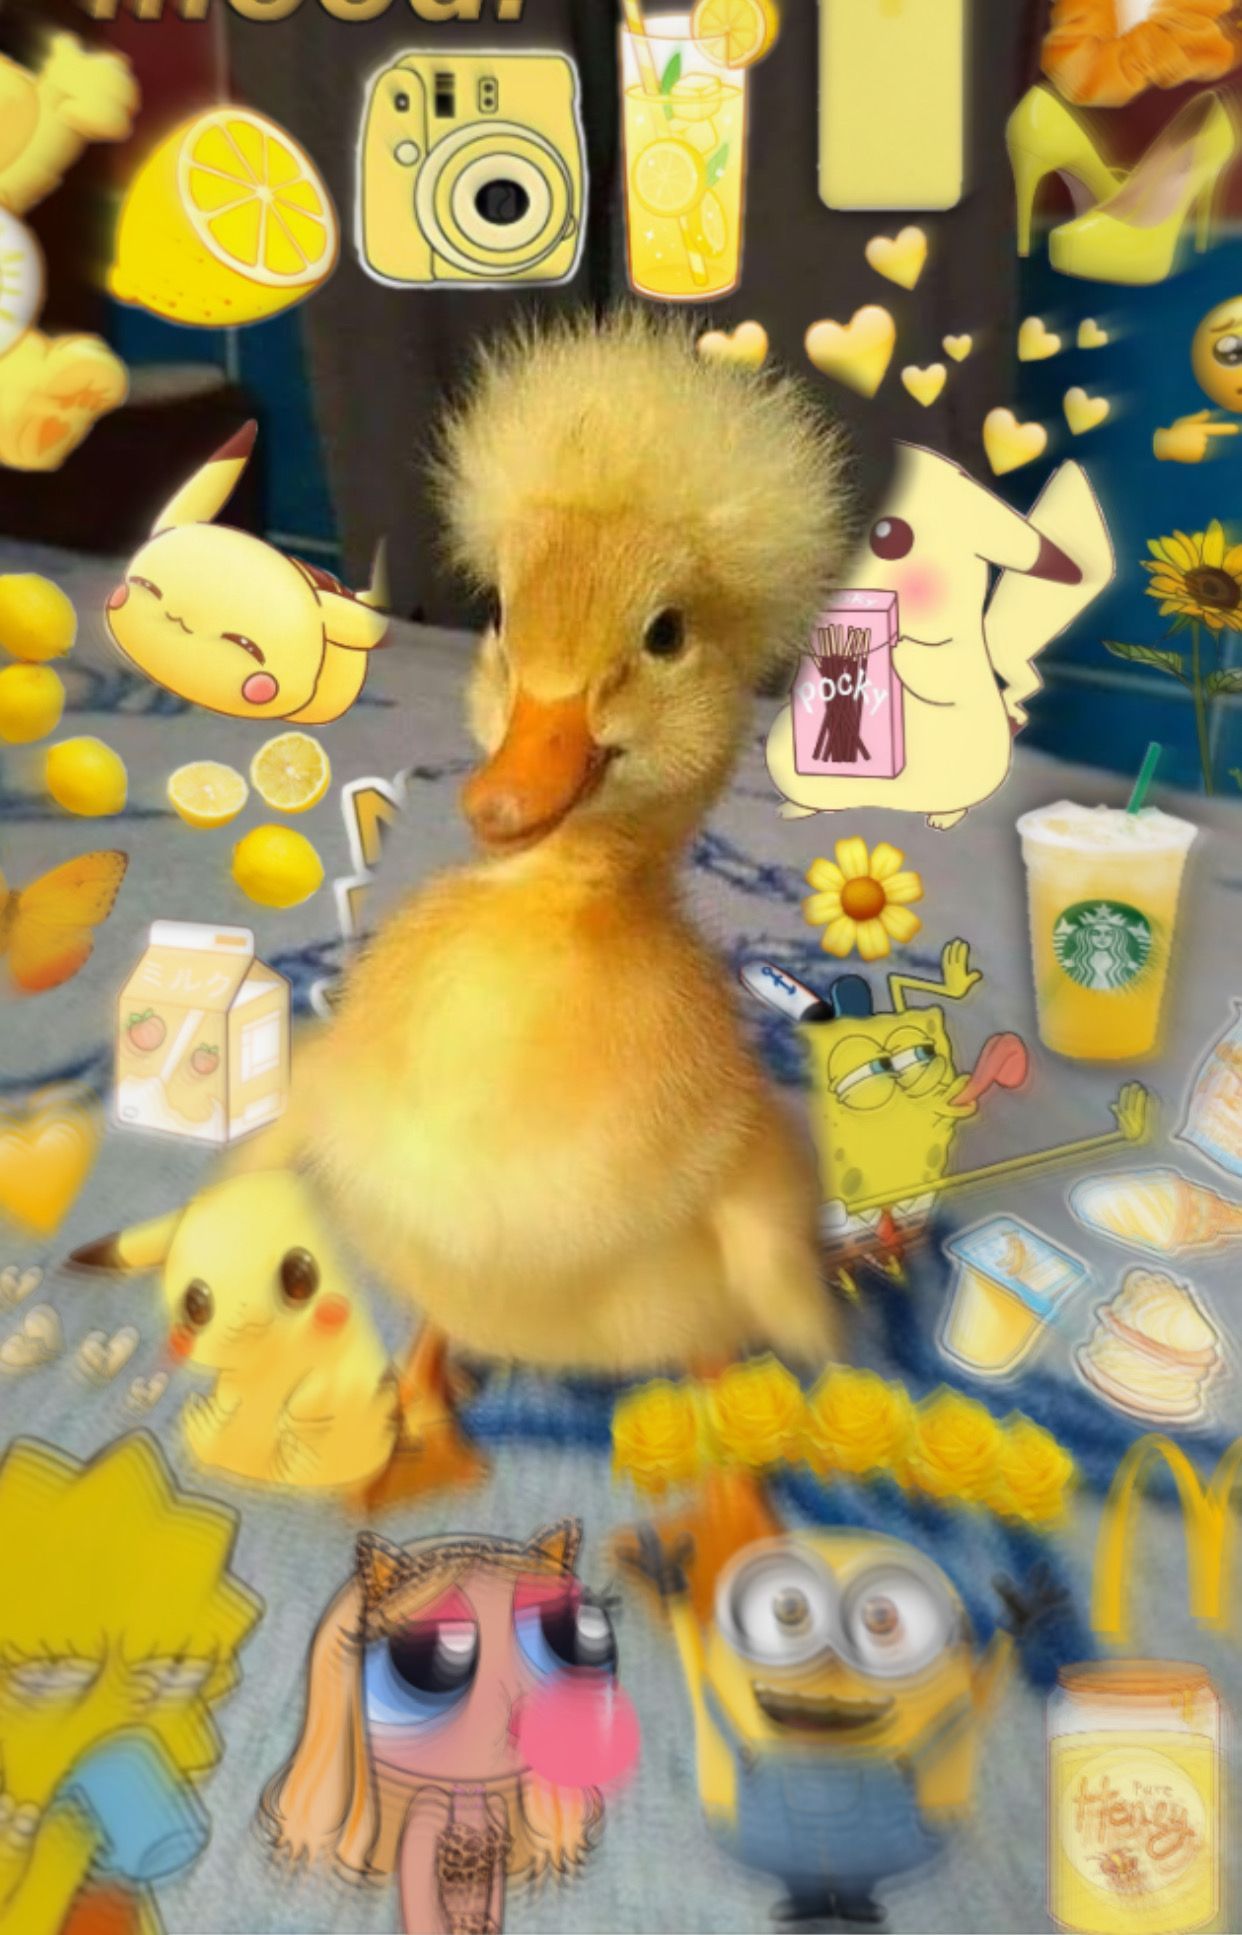 A yellow duckling standing on a counter with a background of cartoon characters. - Duck